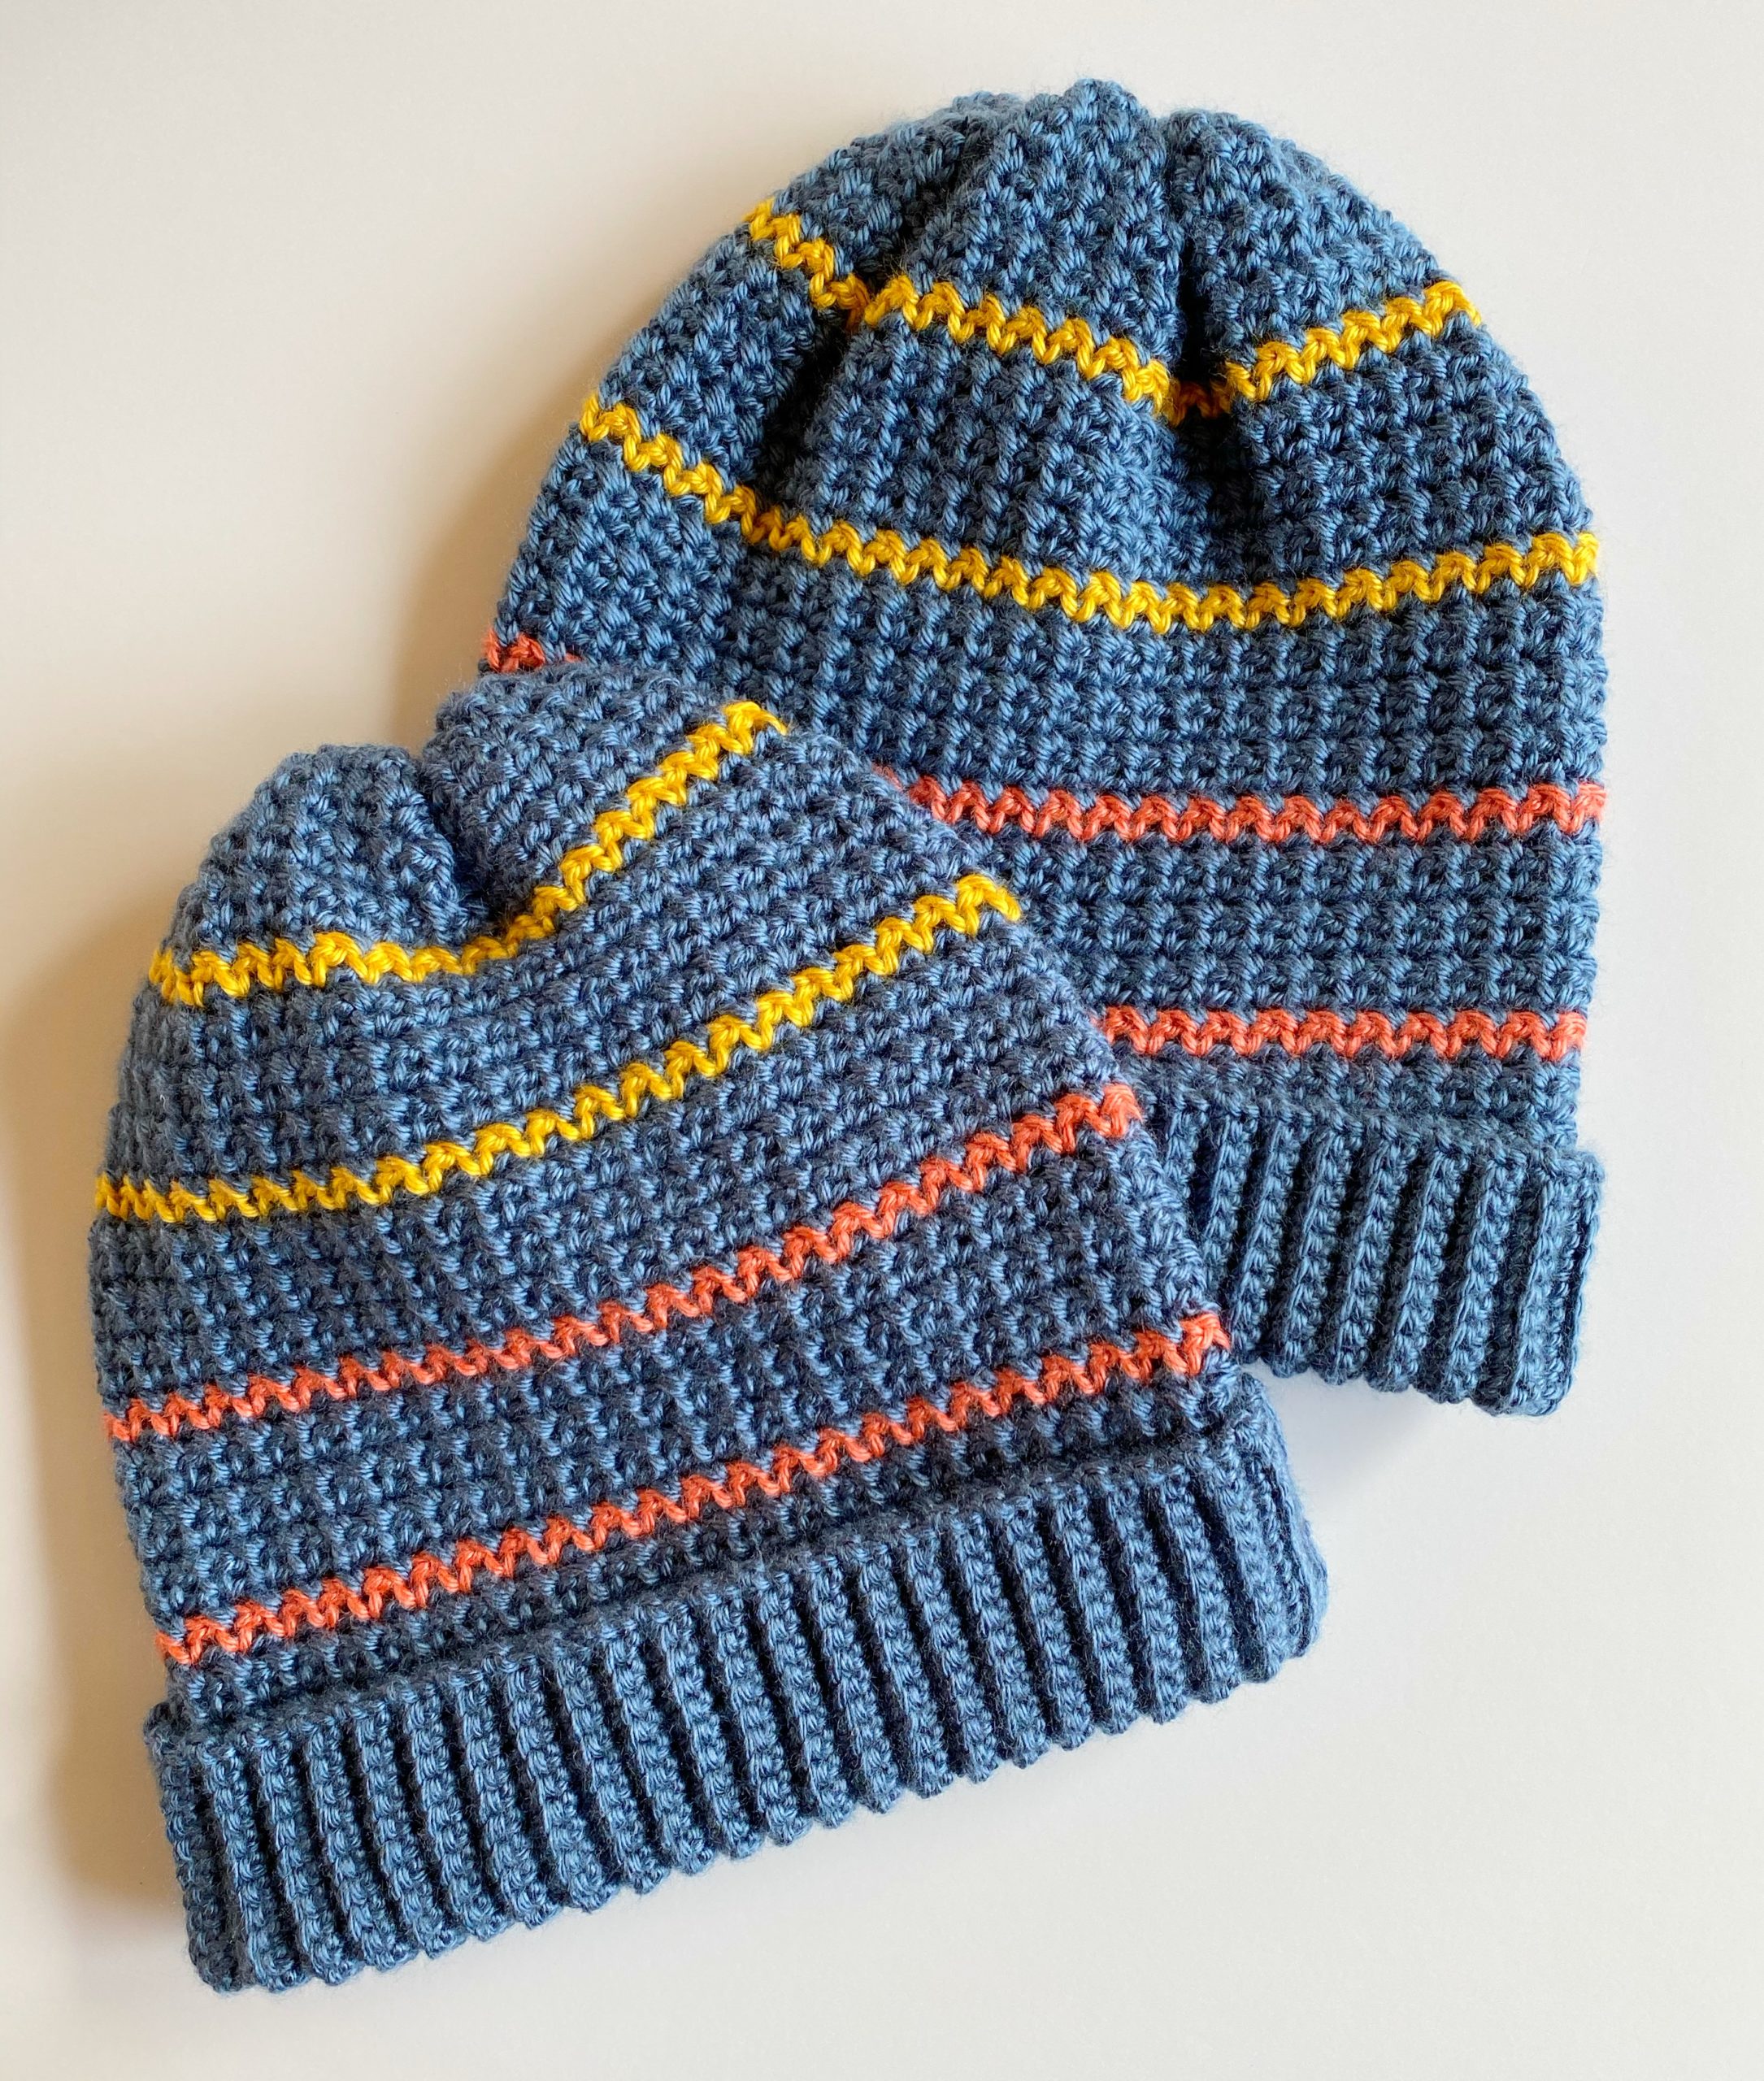 Crochet Stitches For Hats